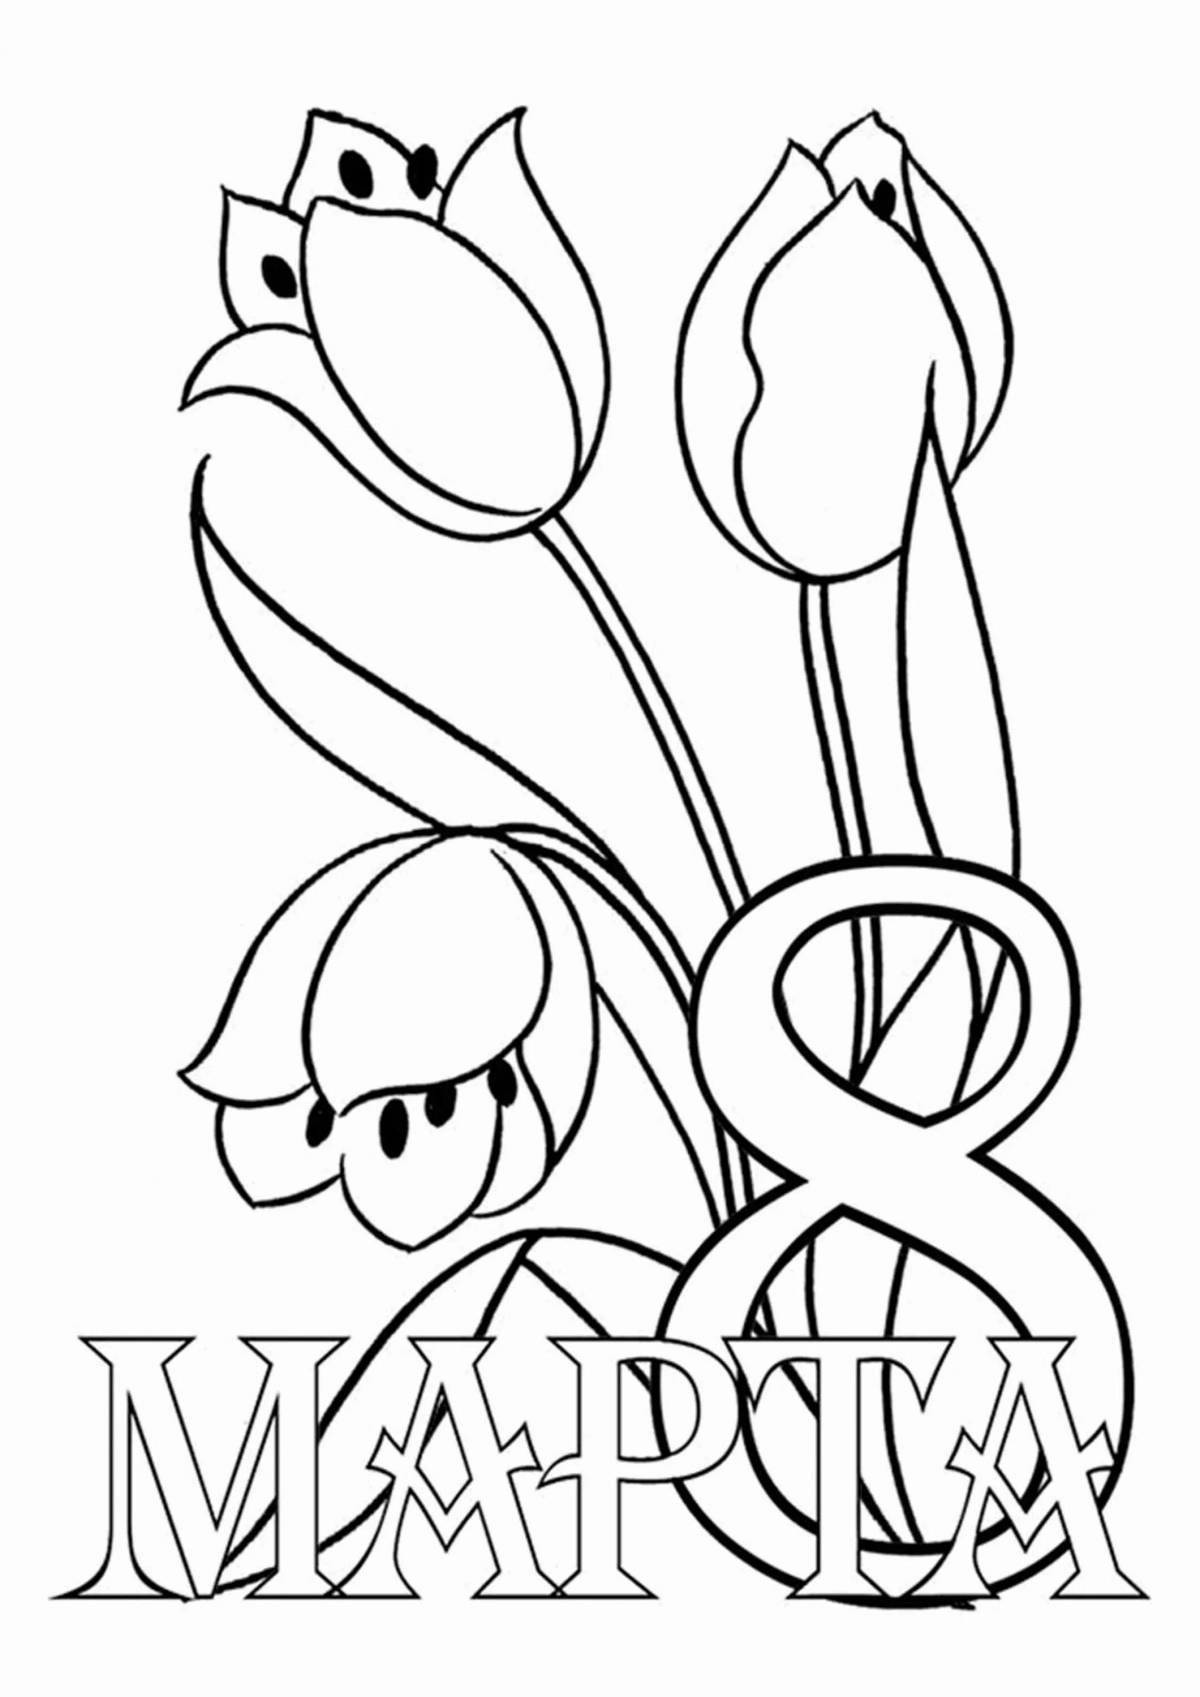 Joyful tulips March 8 coloring pages